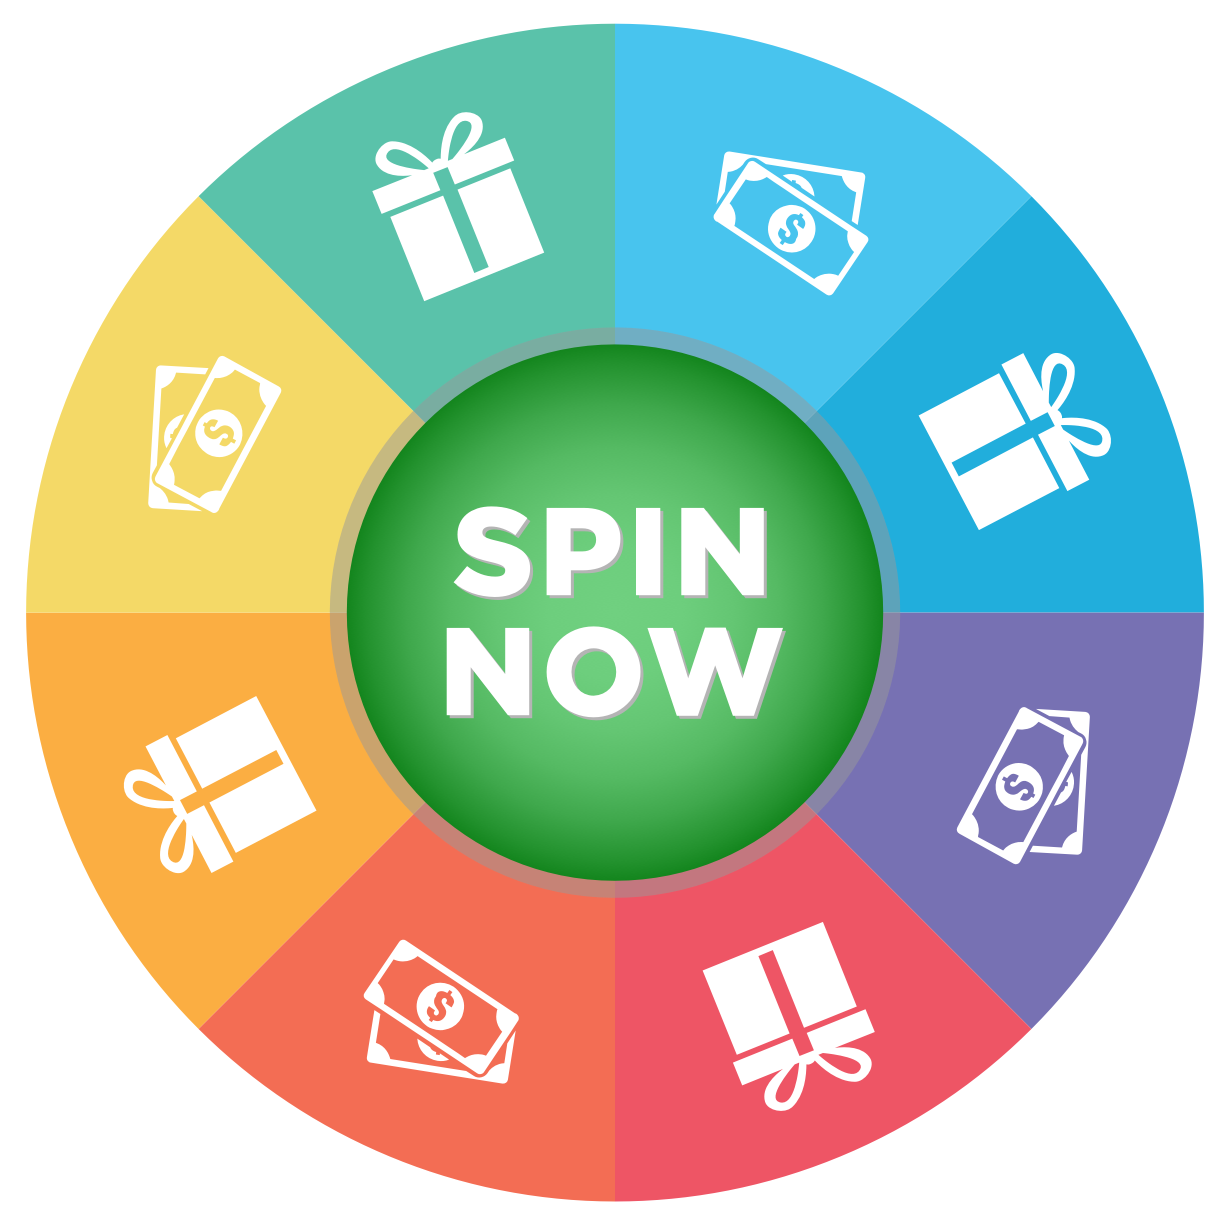 Spin now. Spin. Spin to win. Спина вектор. Спин продажи.